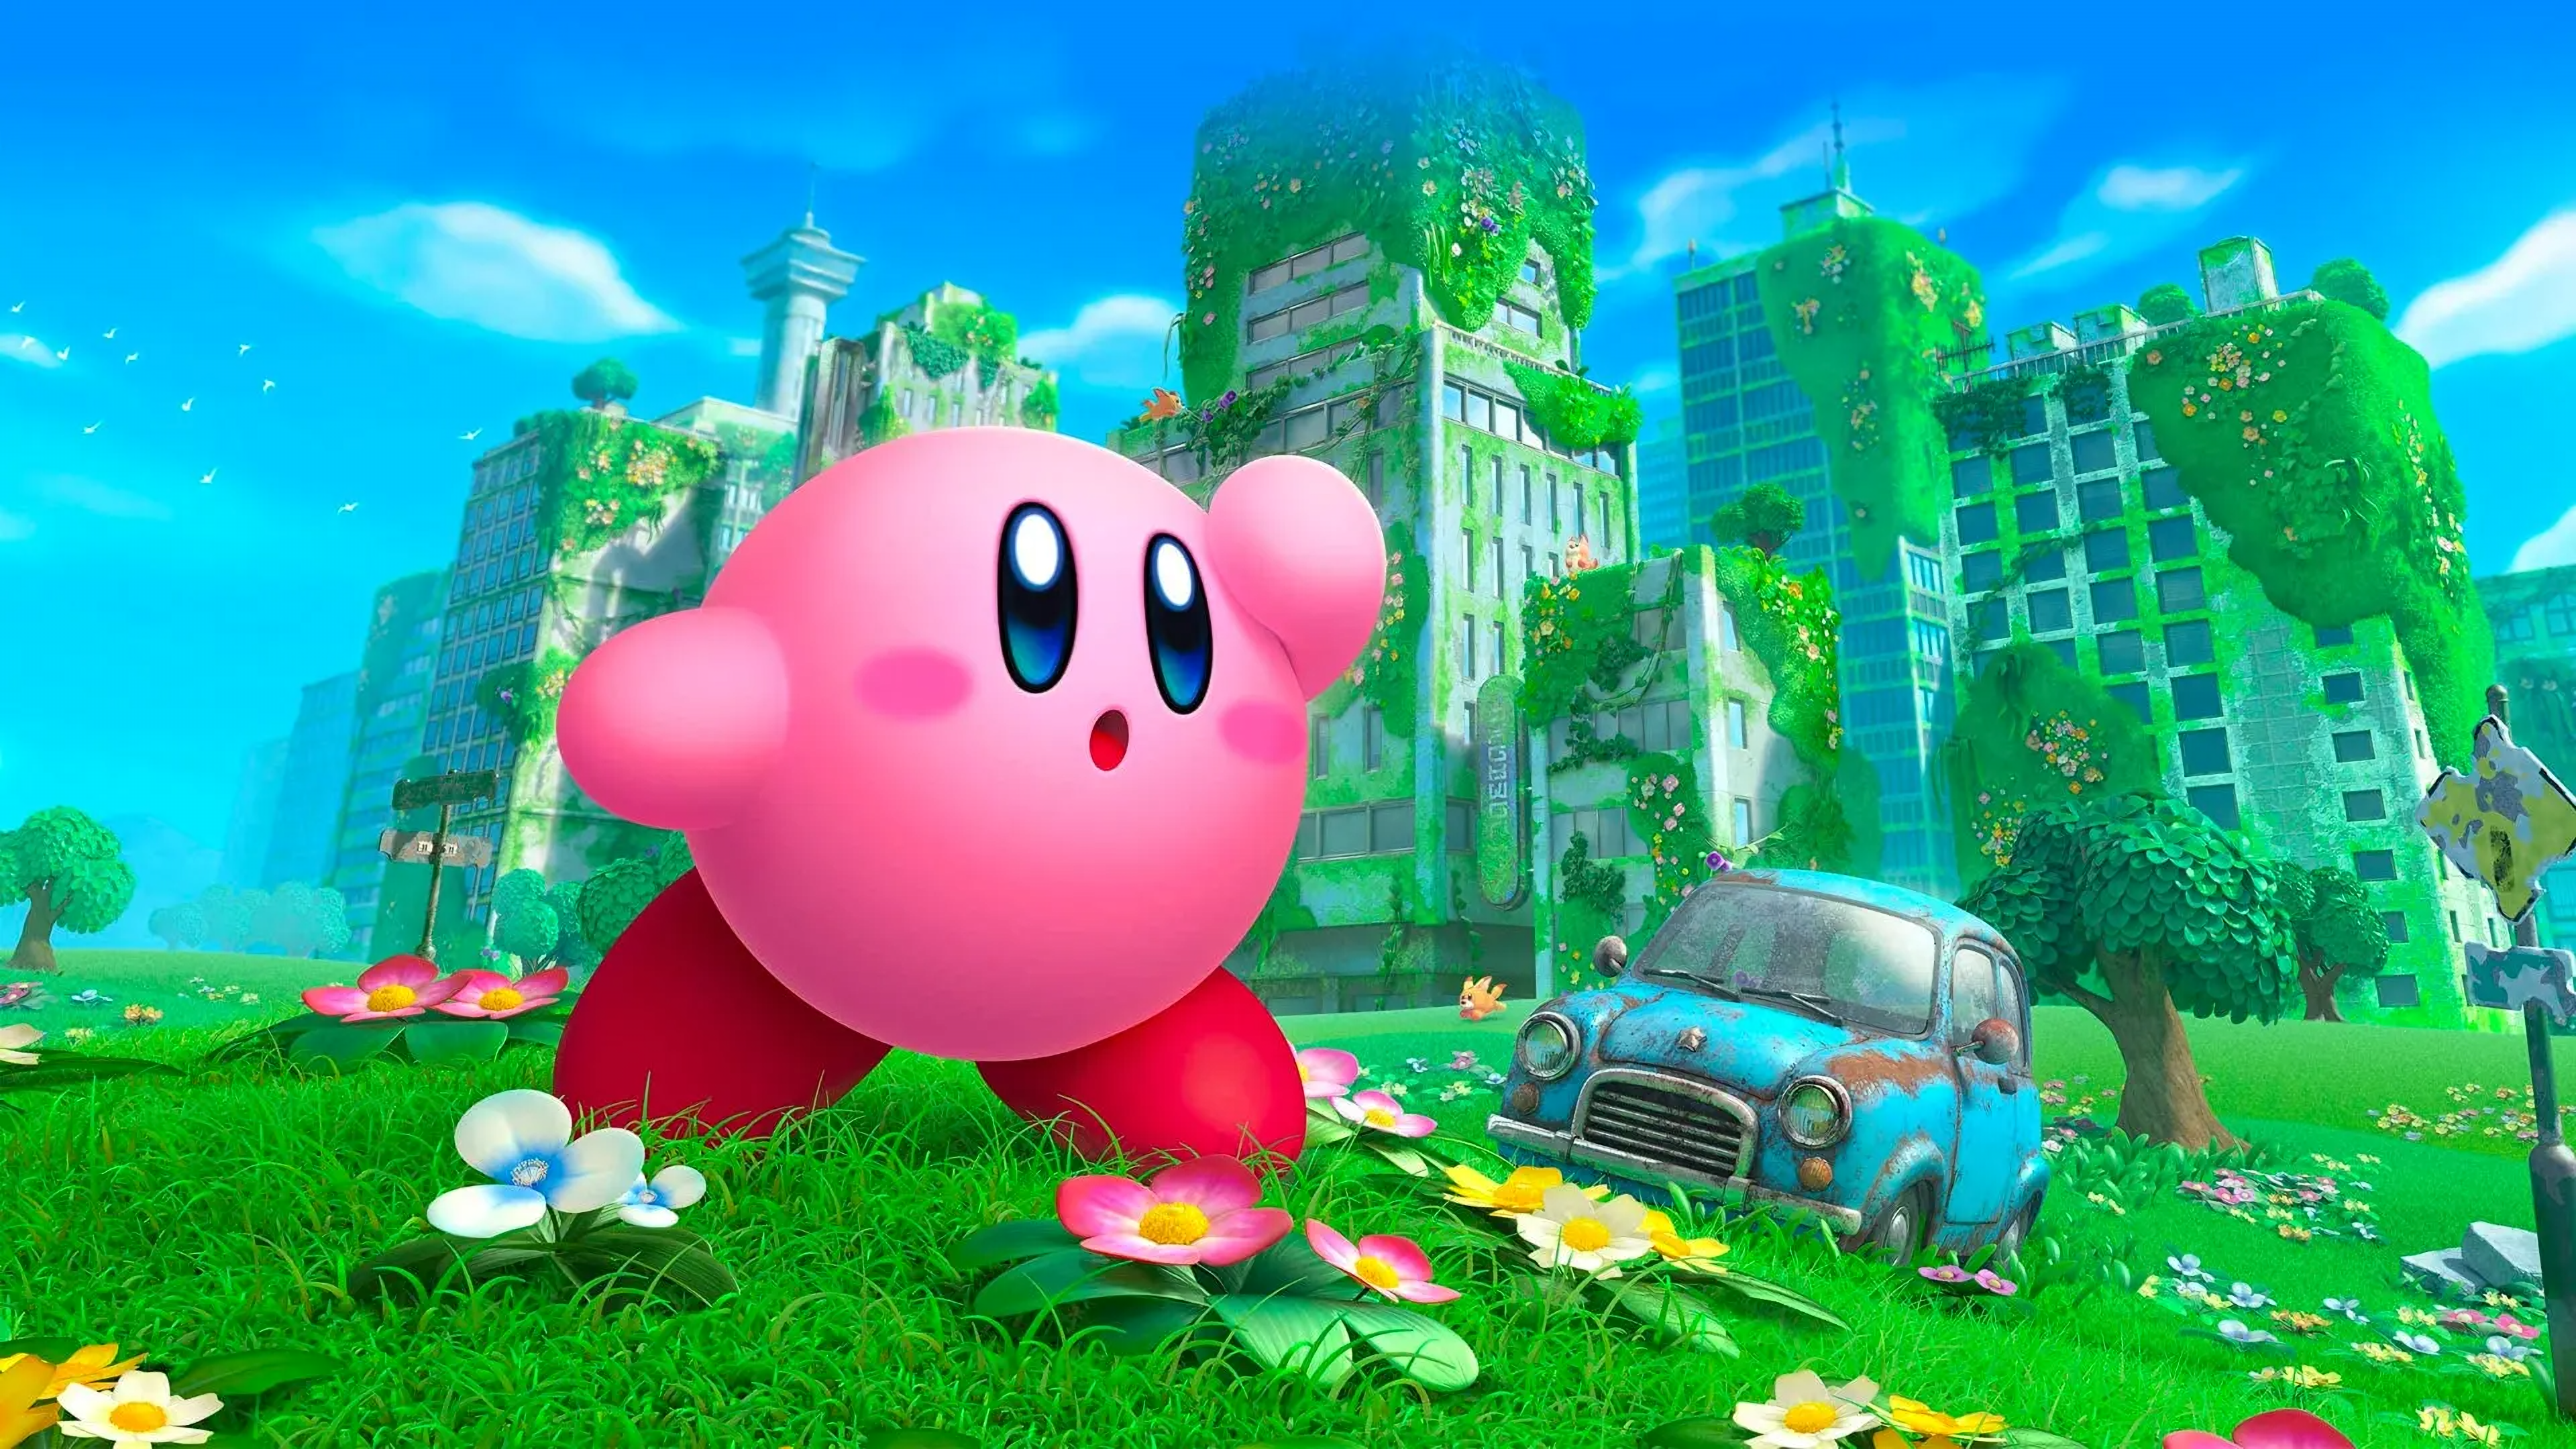 Image for Kirby and the Forgotten Land on Nintendo Switch: The Digital Foundry Tech Review